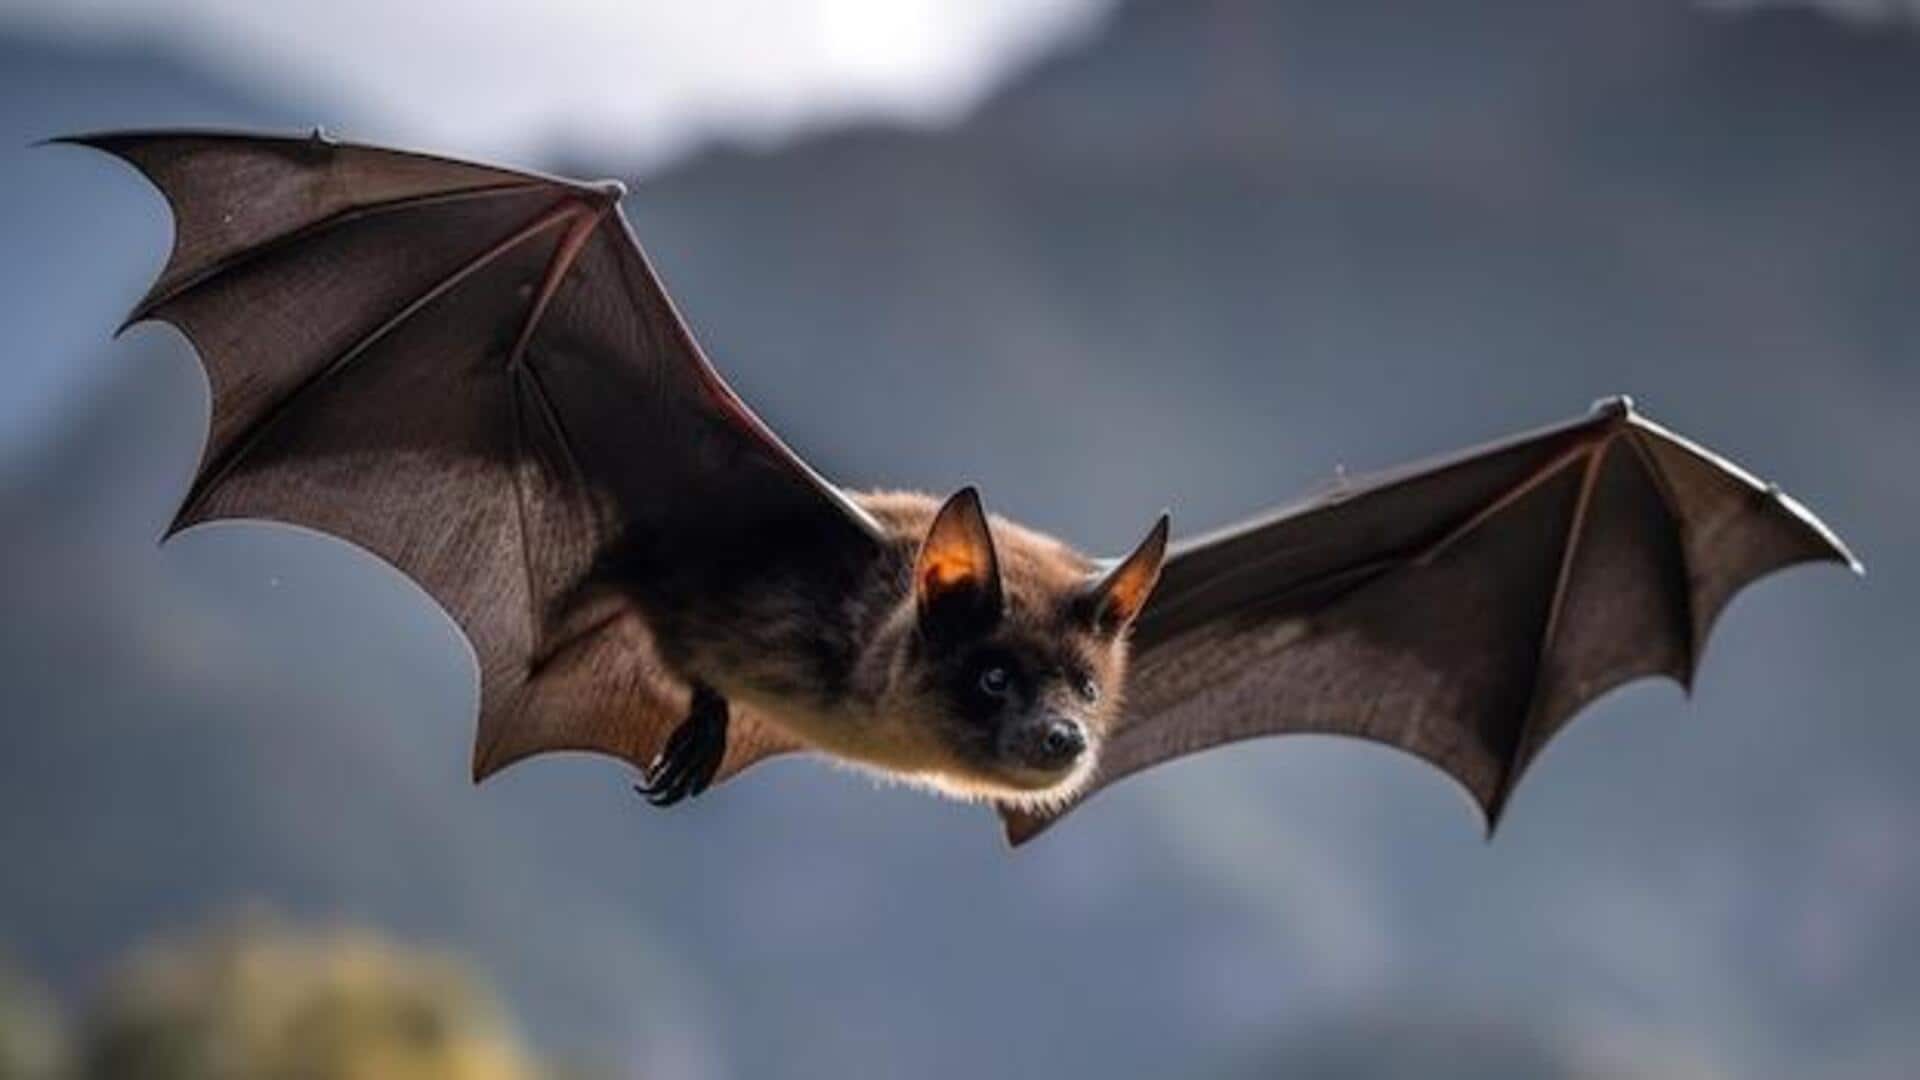 Bat activity goes down at solar farms, finds study